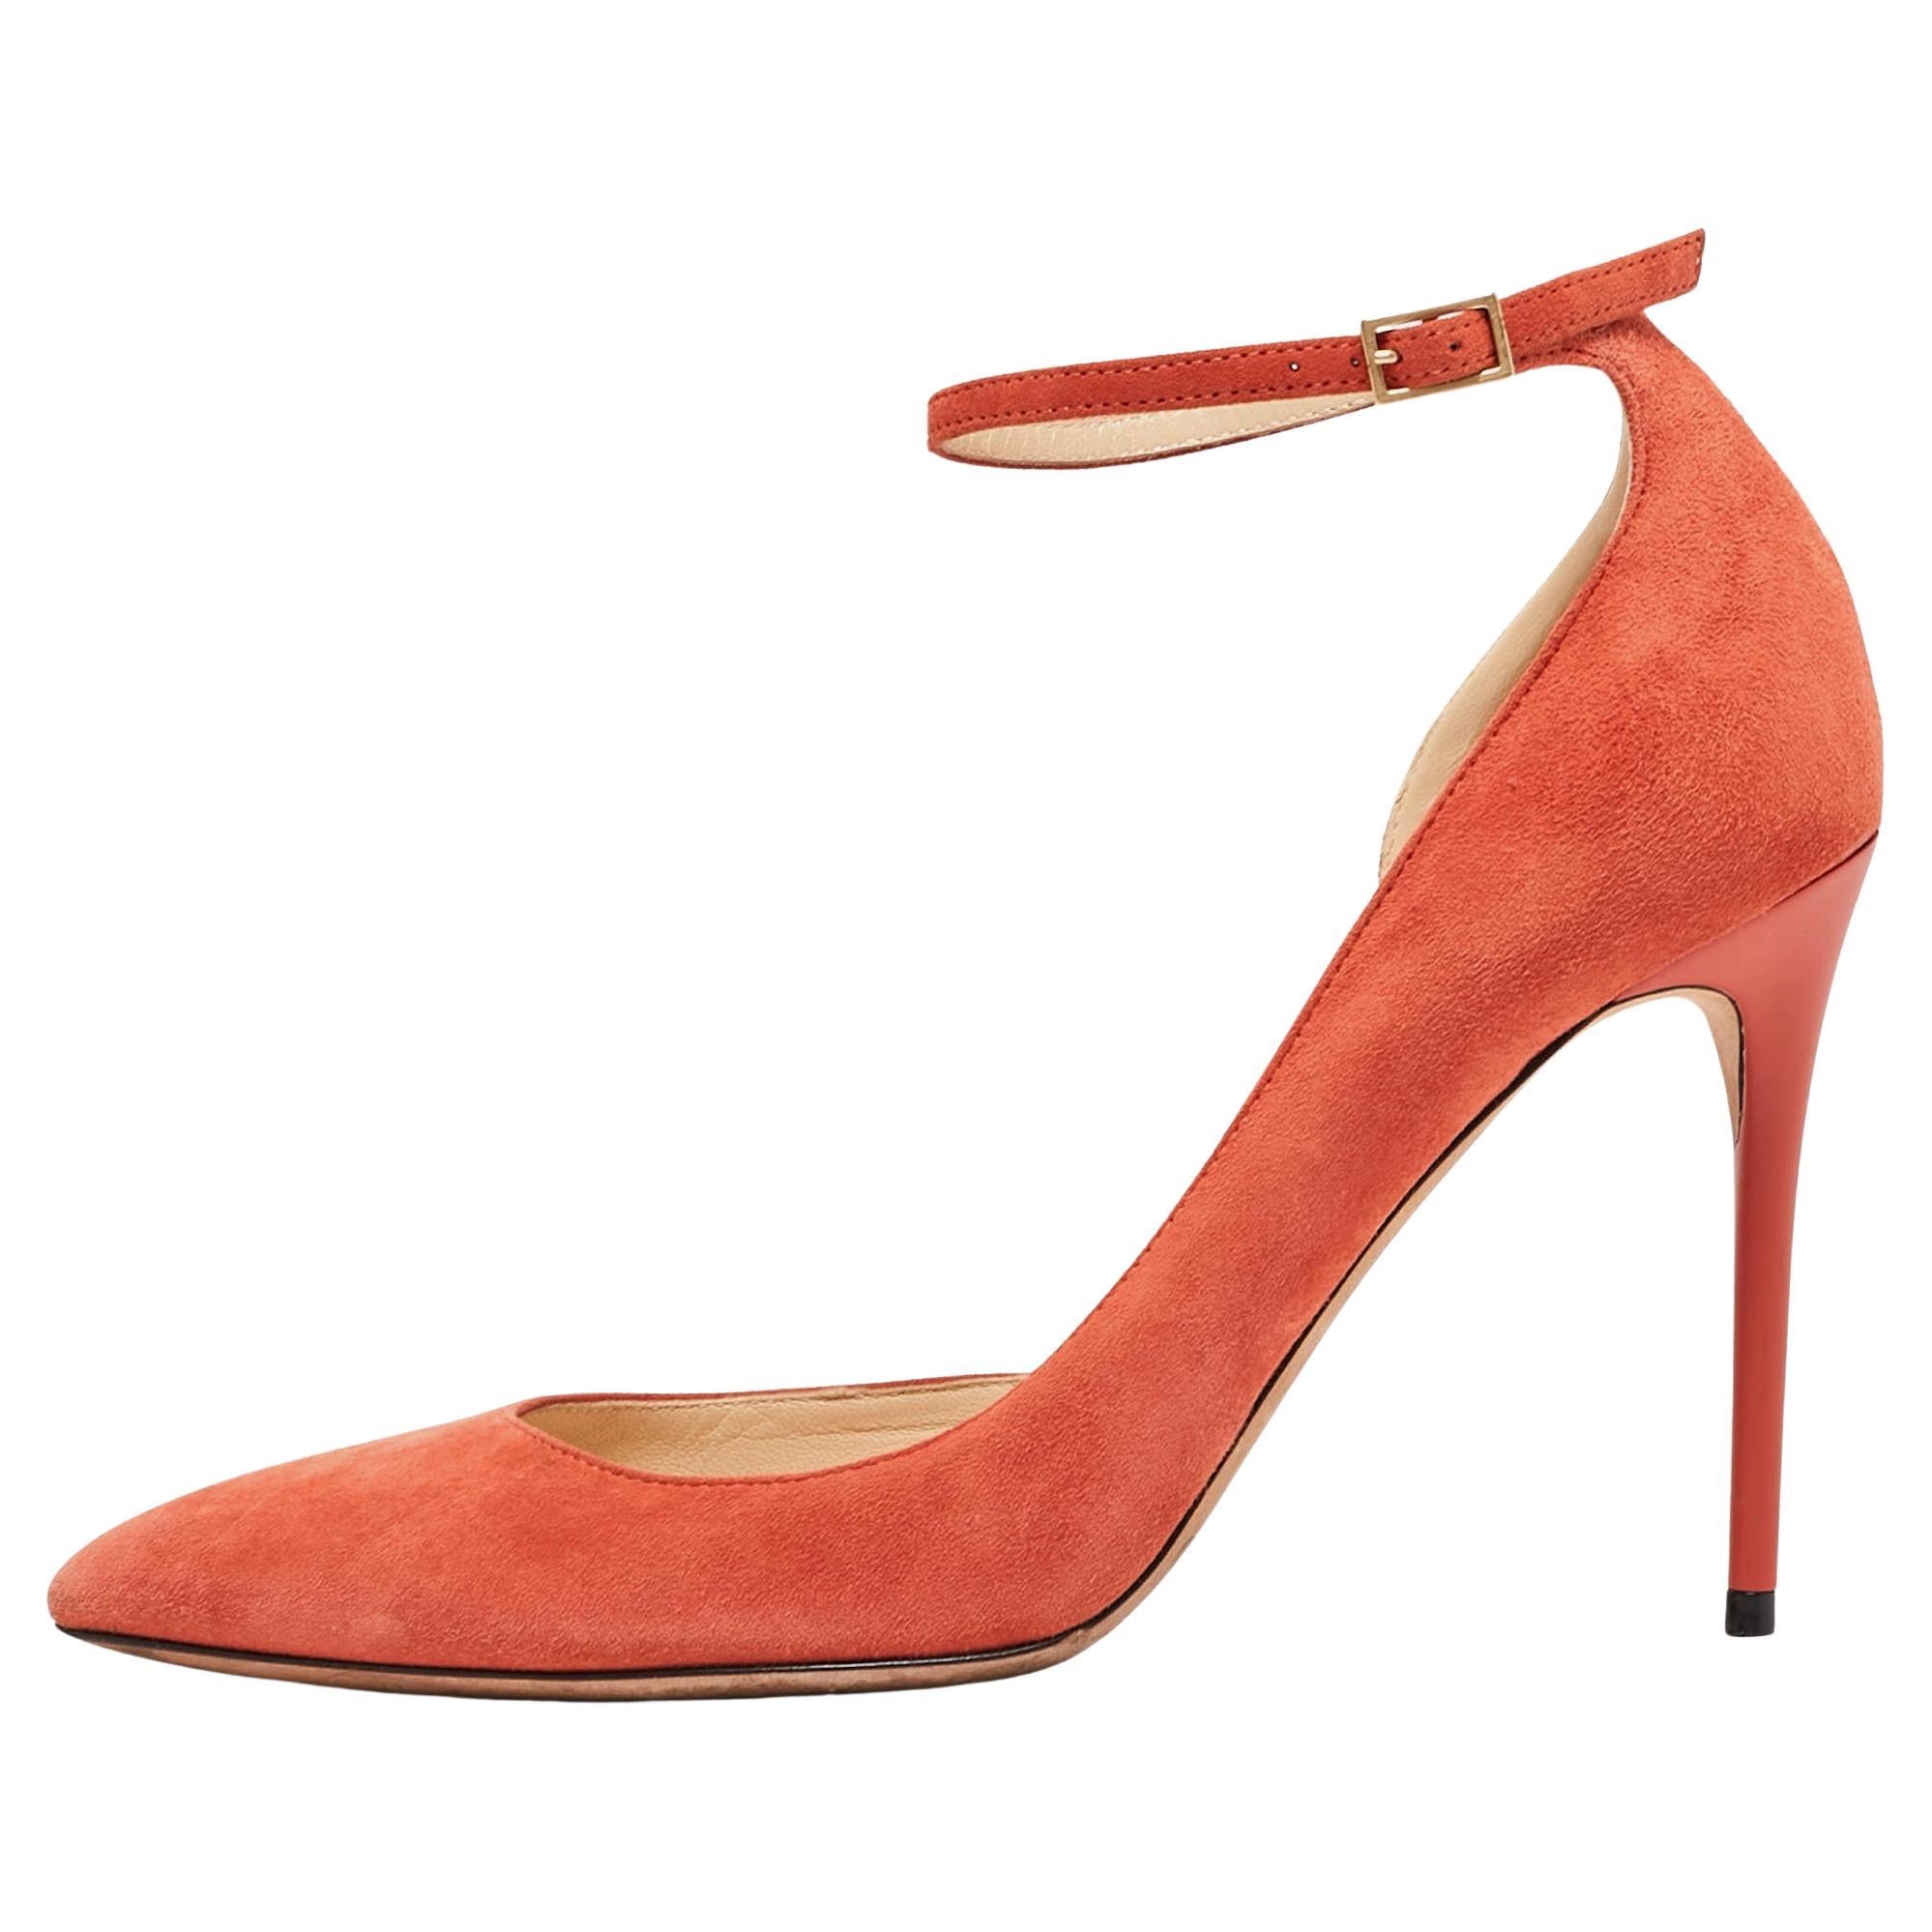 Jimmy Choo Orange Suede Lucy Ankle-Strap Pumps Size 36.5 For Sale